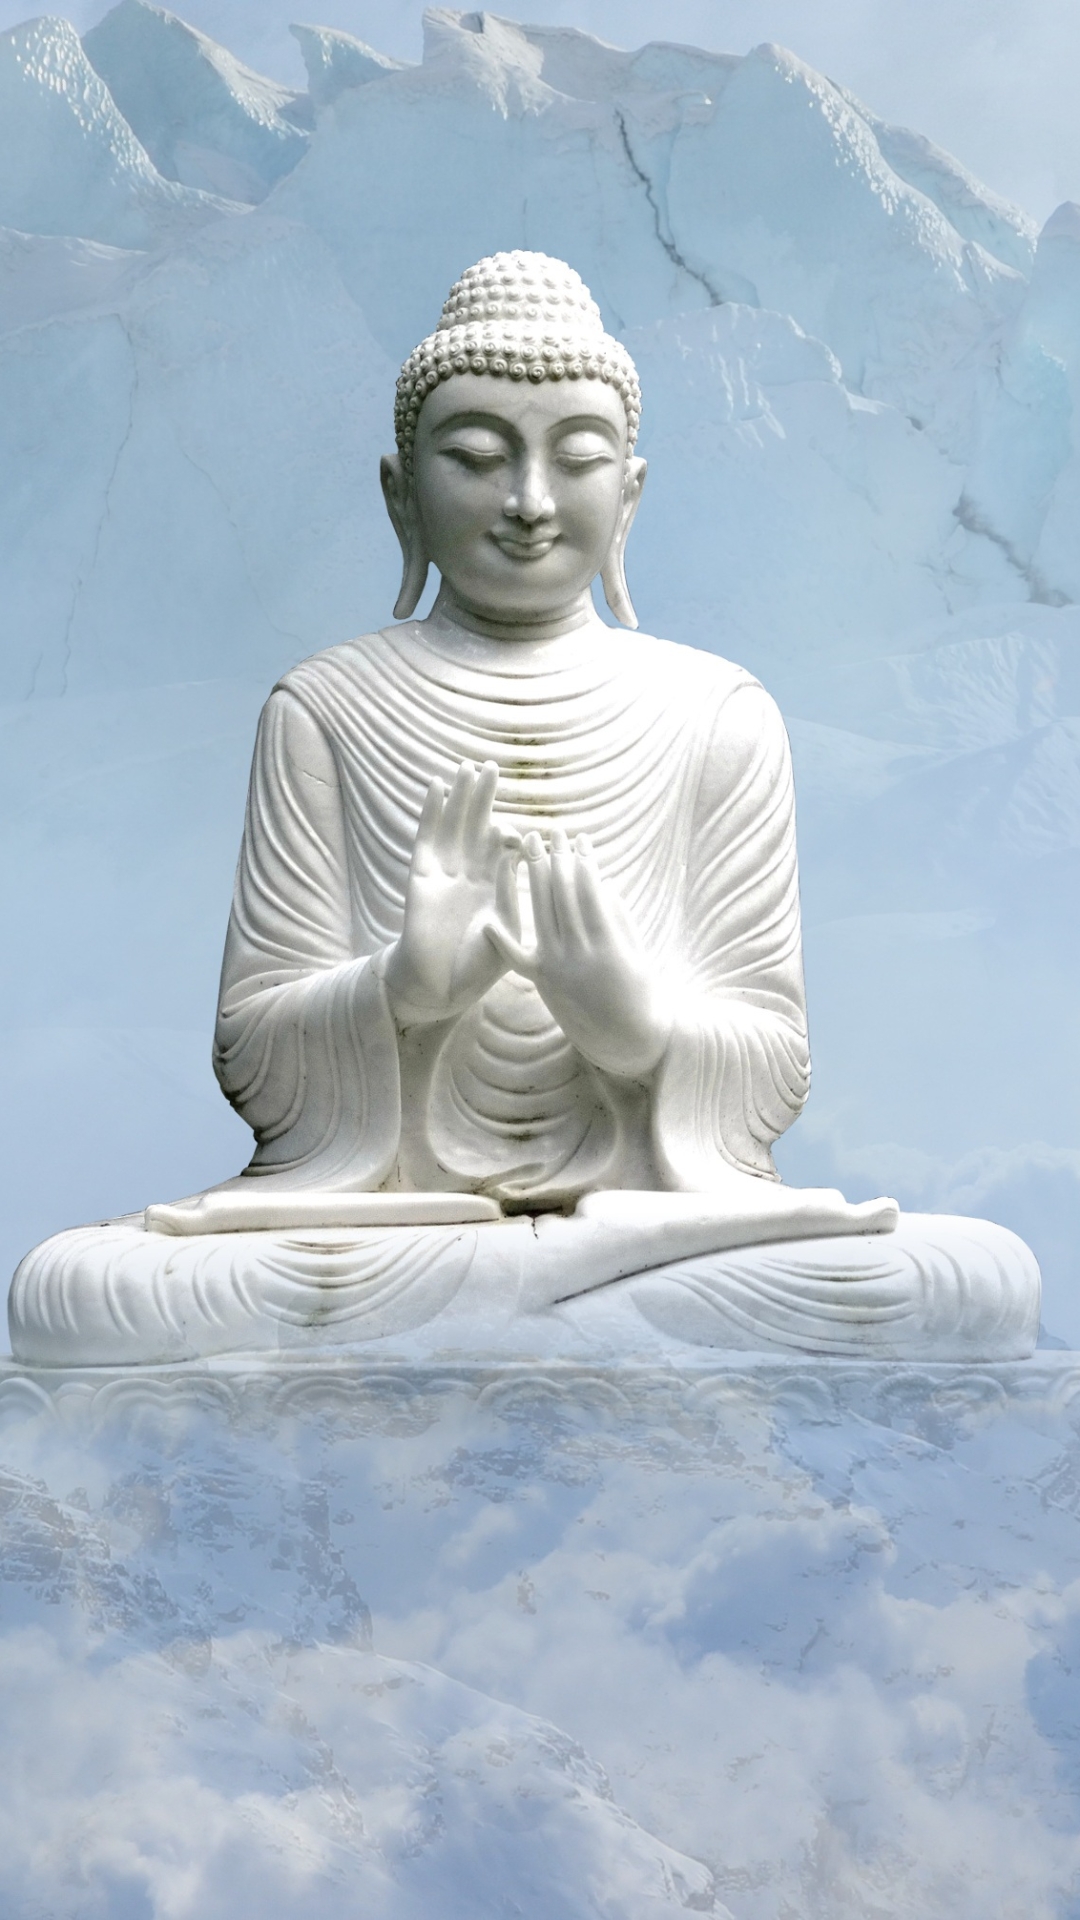 Buddha old mobile, cell phone, smartphone wallpapers hd, desktop backgrounds  240x320, images and pictures